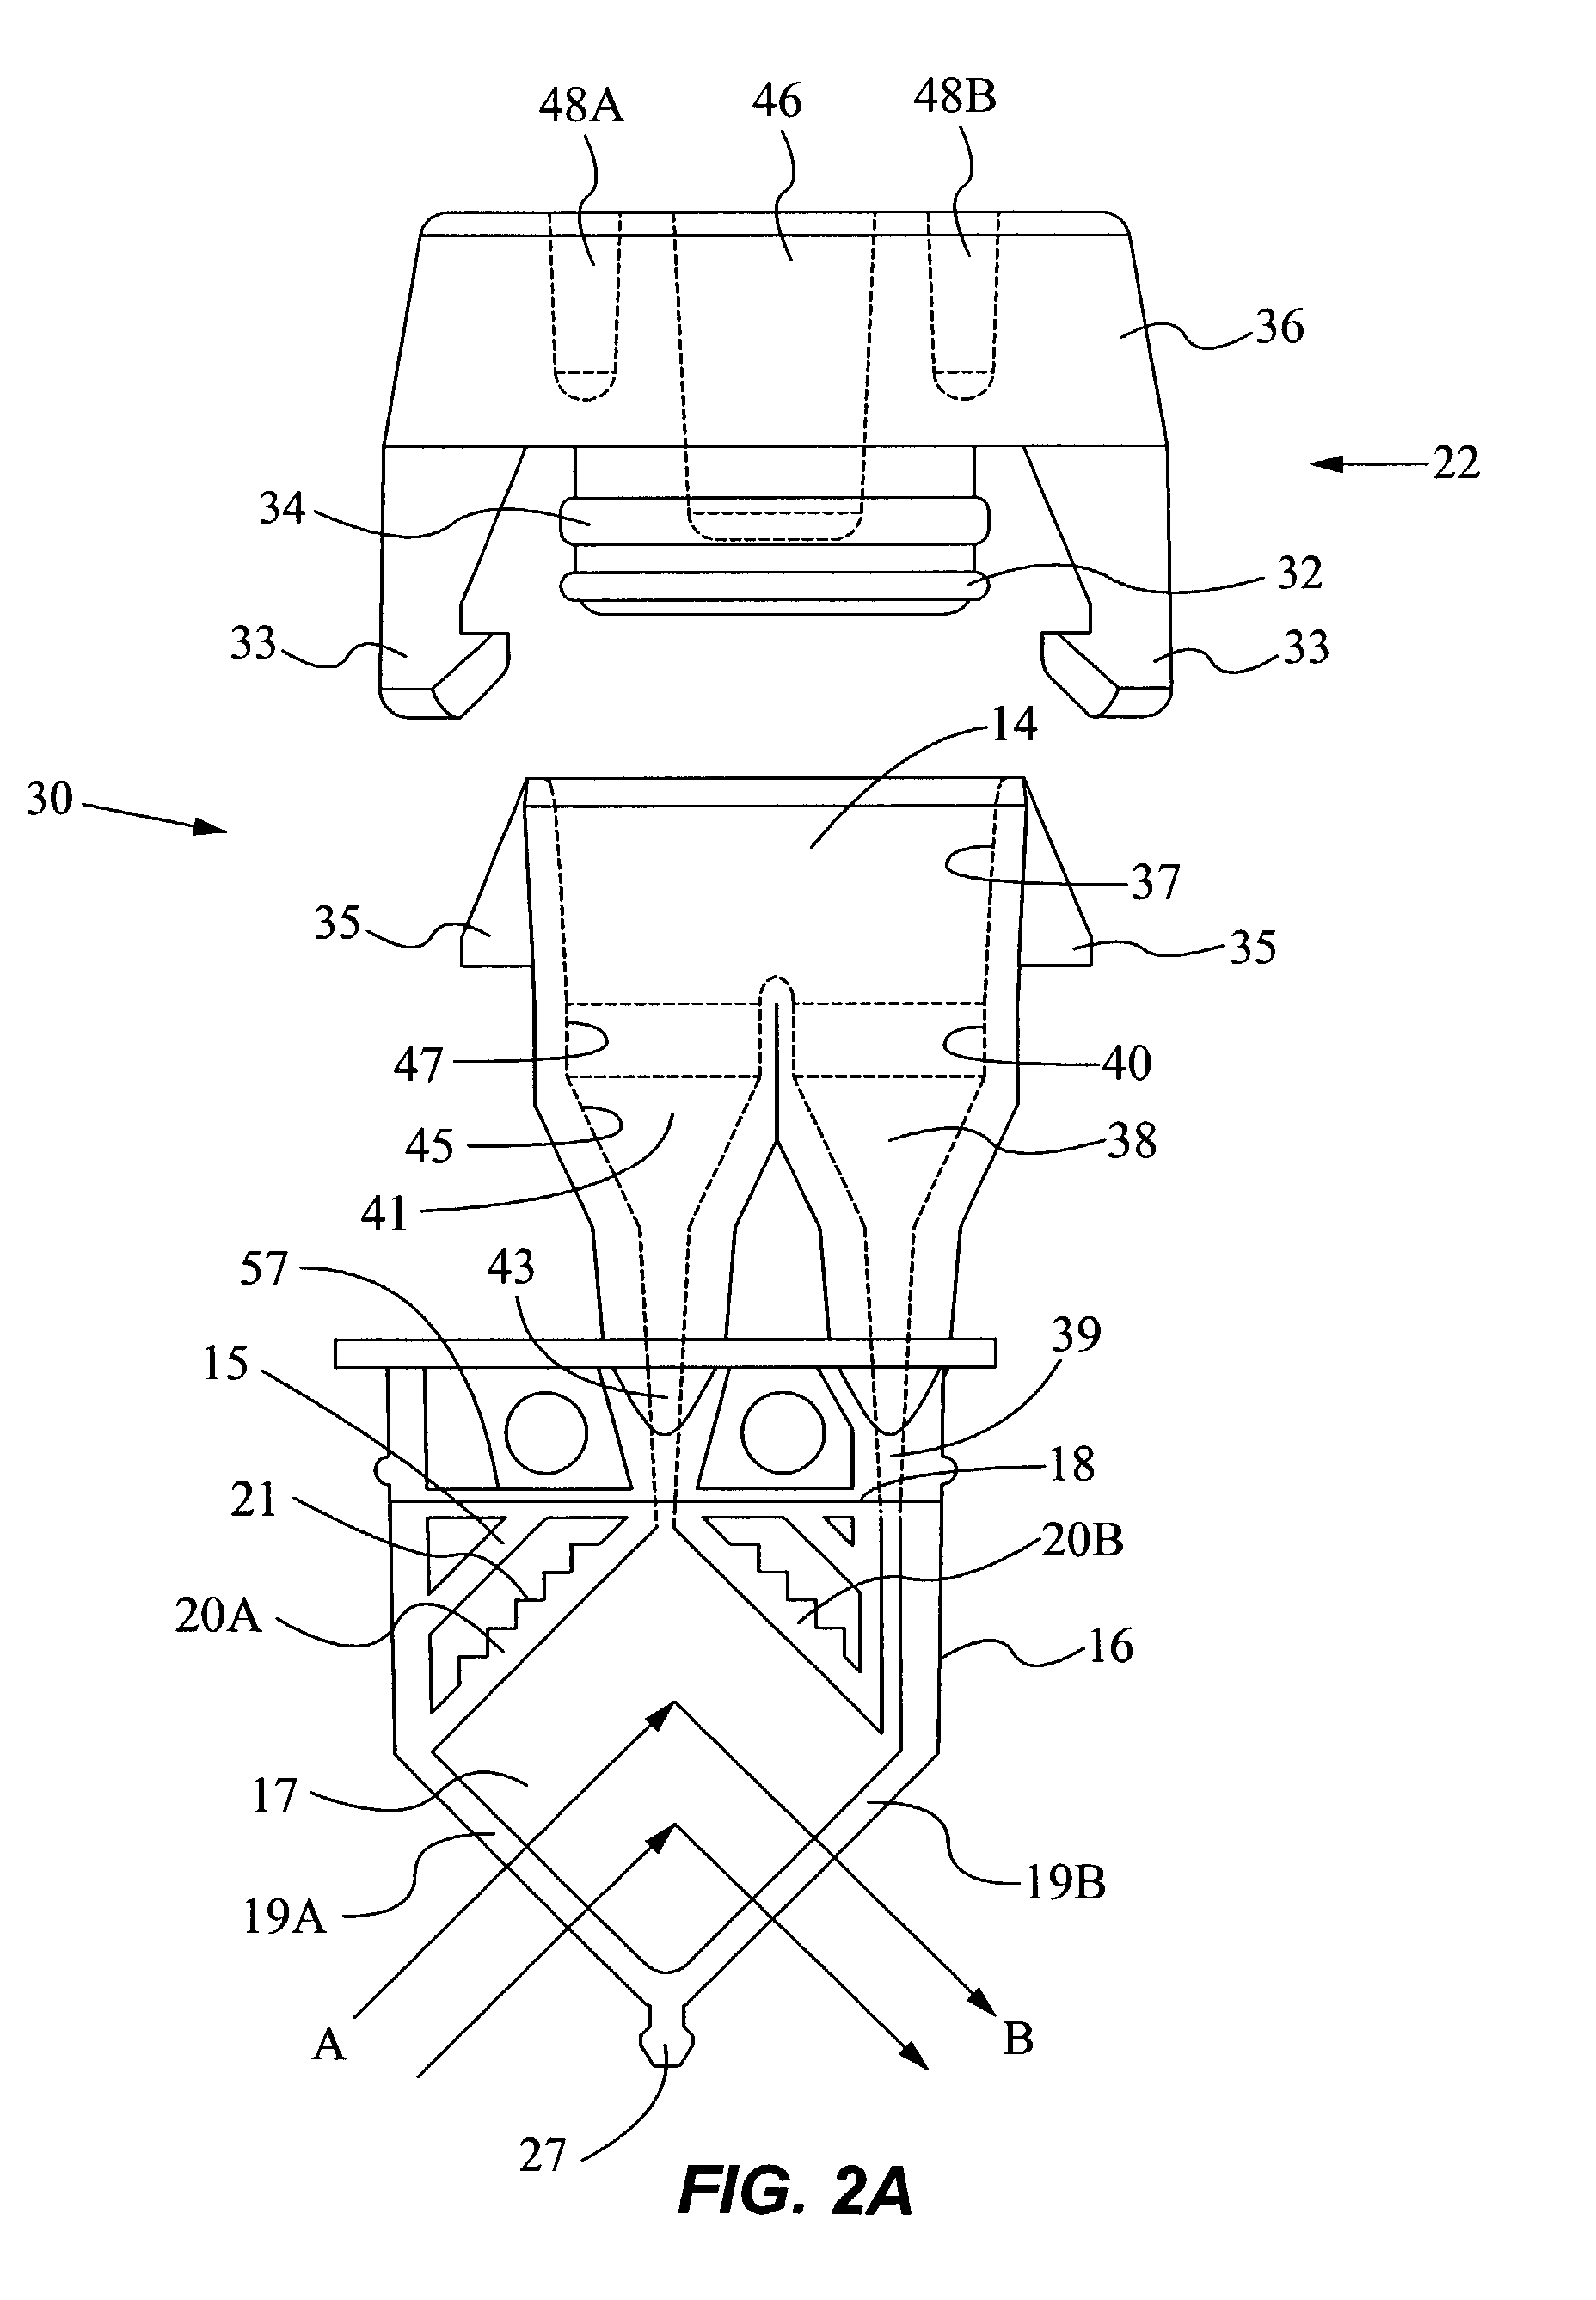 Reaction vessel and temperature control system